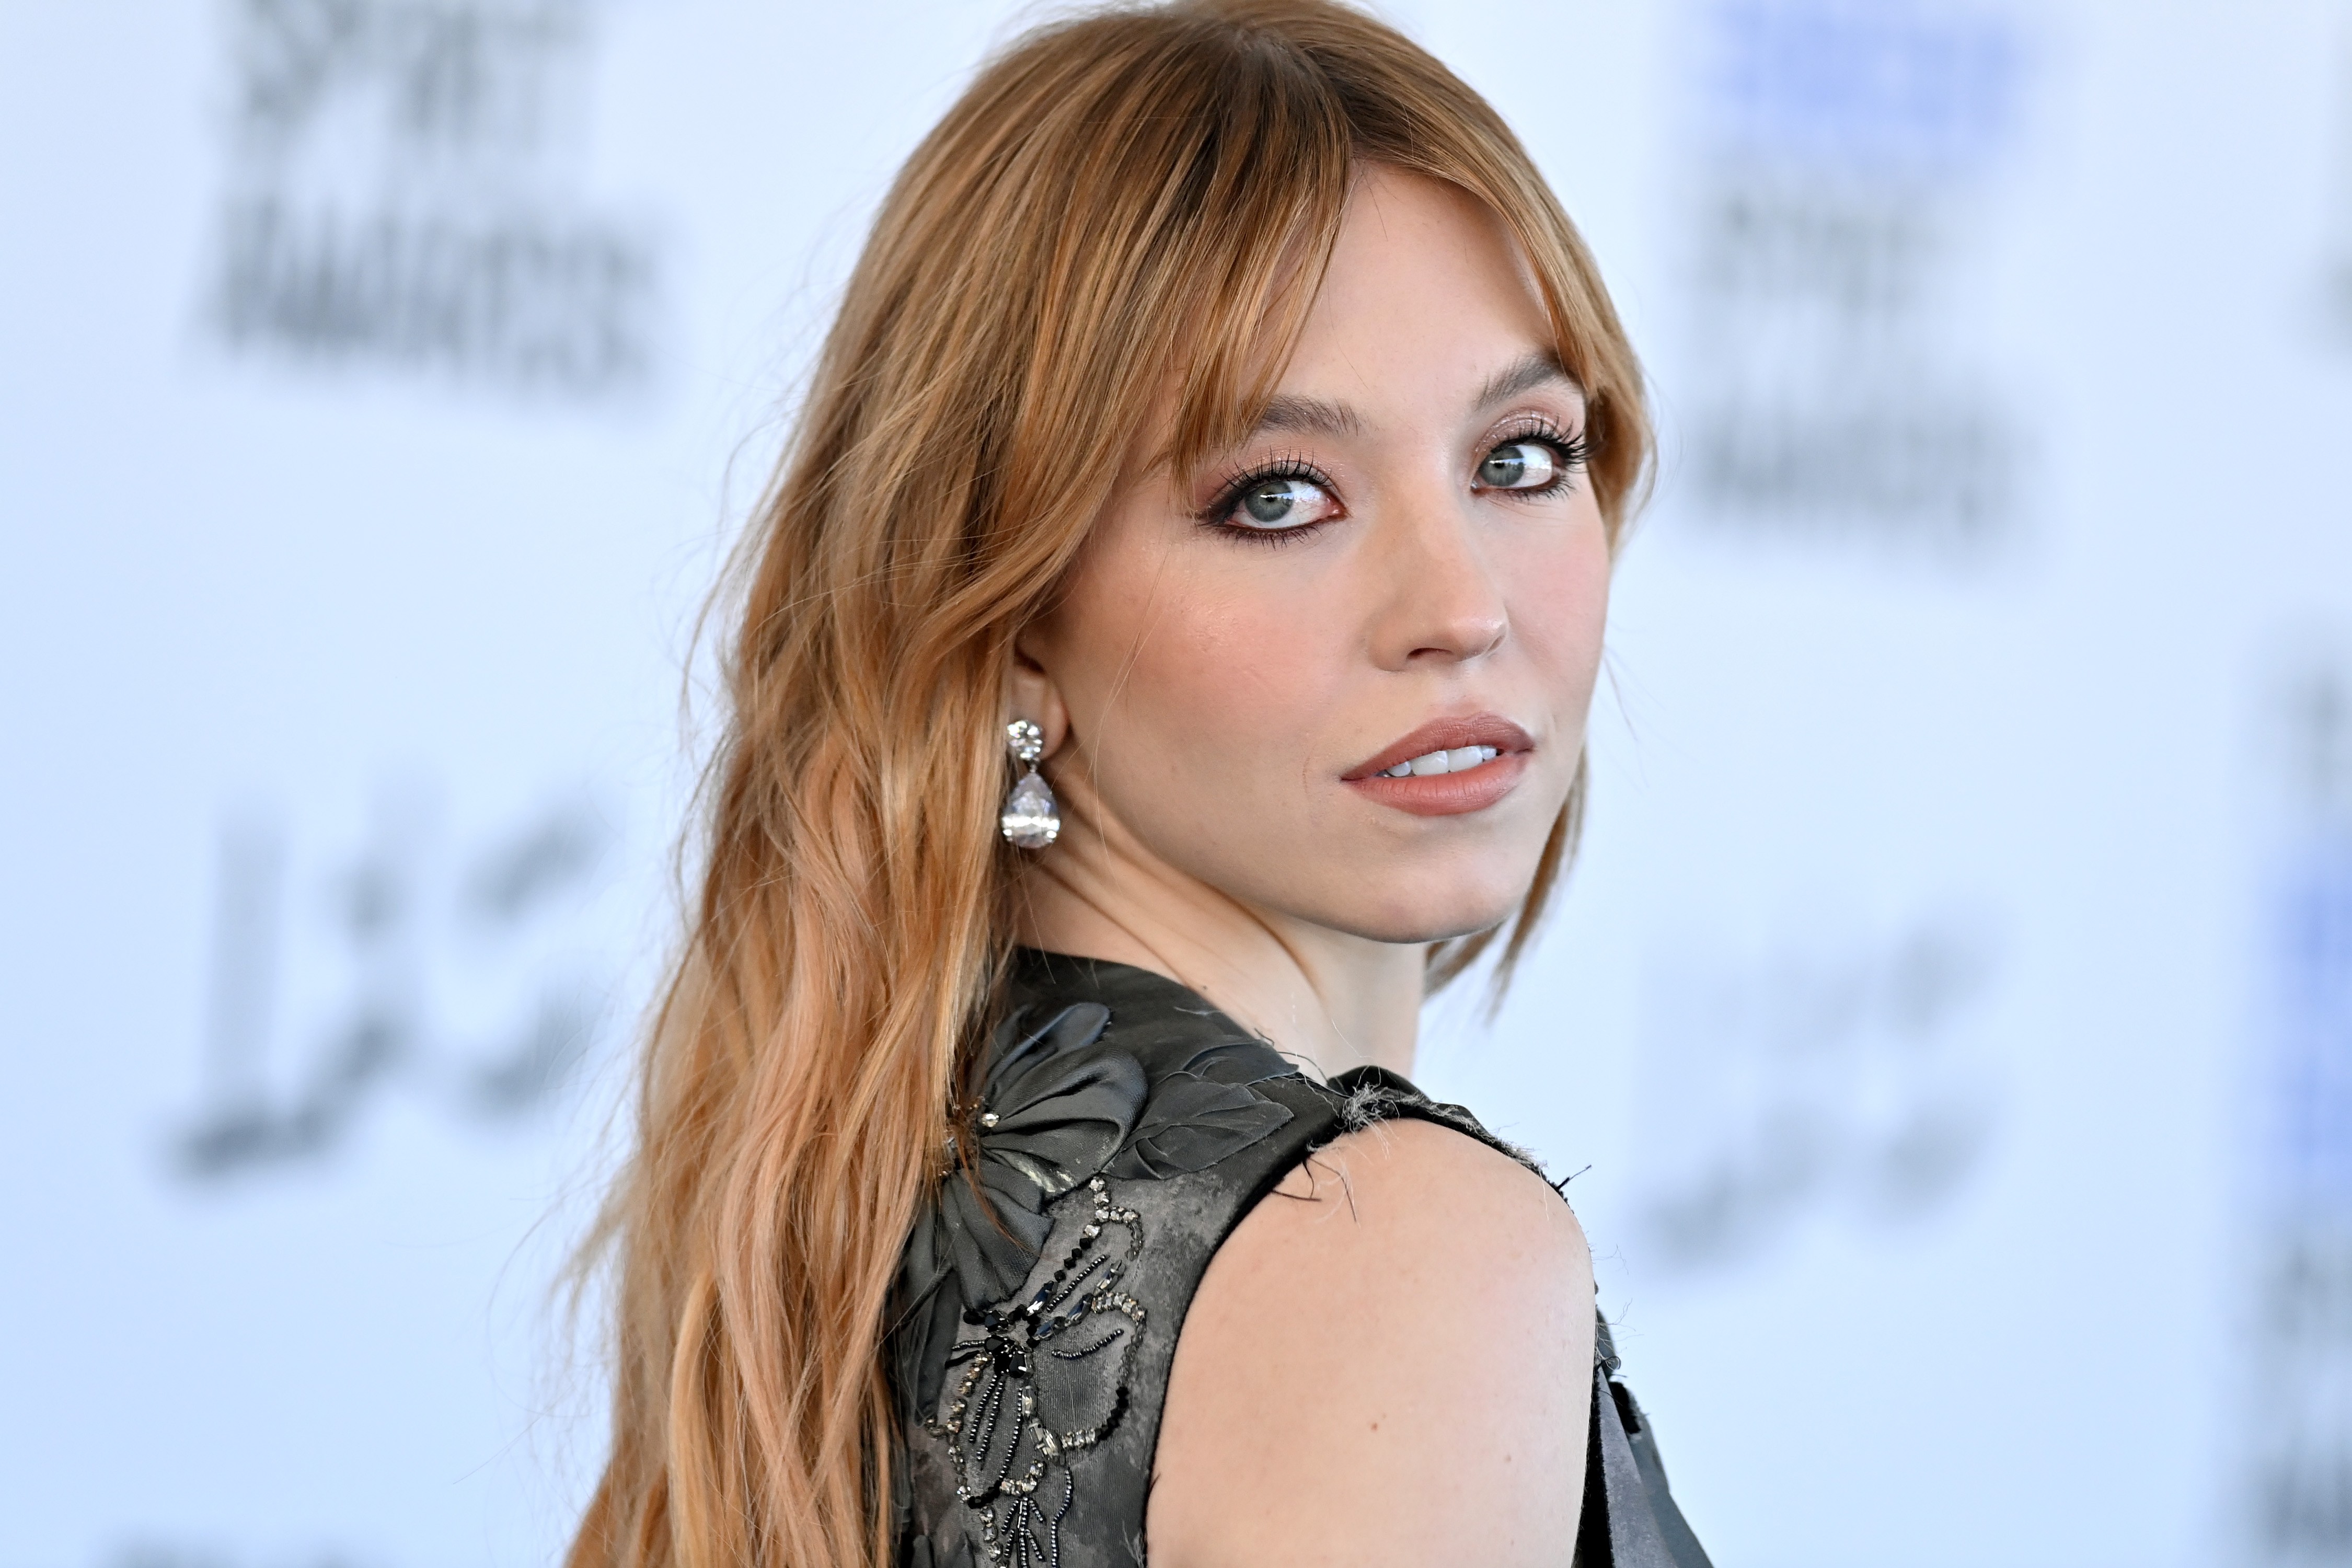 Sydney Sweeney SANTA MONICA, CALIFORNIA - MARCH 06: Sydney Sweeney attends the 2022 Film Independent Spirit Awards on March 06, 2022 in Santa Monica, California. (Photo by Axelle/Bauer-Griffin/FilmMagic) (Foto: Getty Images/ Axelle/Bauer-Griffin/FilmMagic)